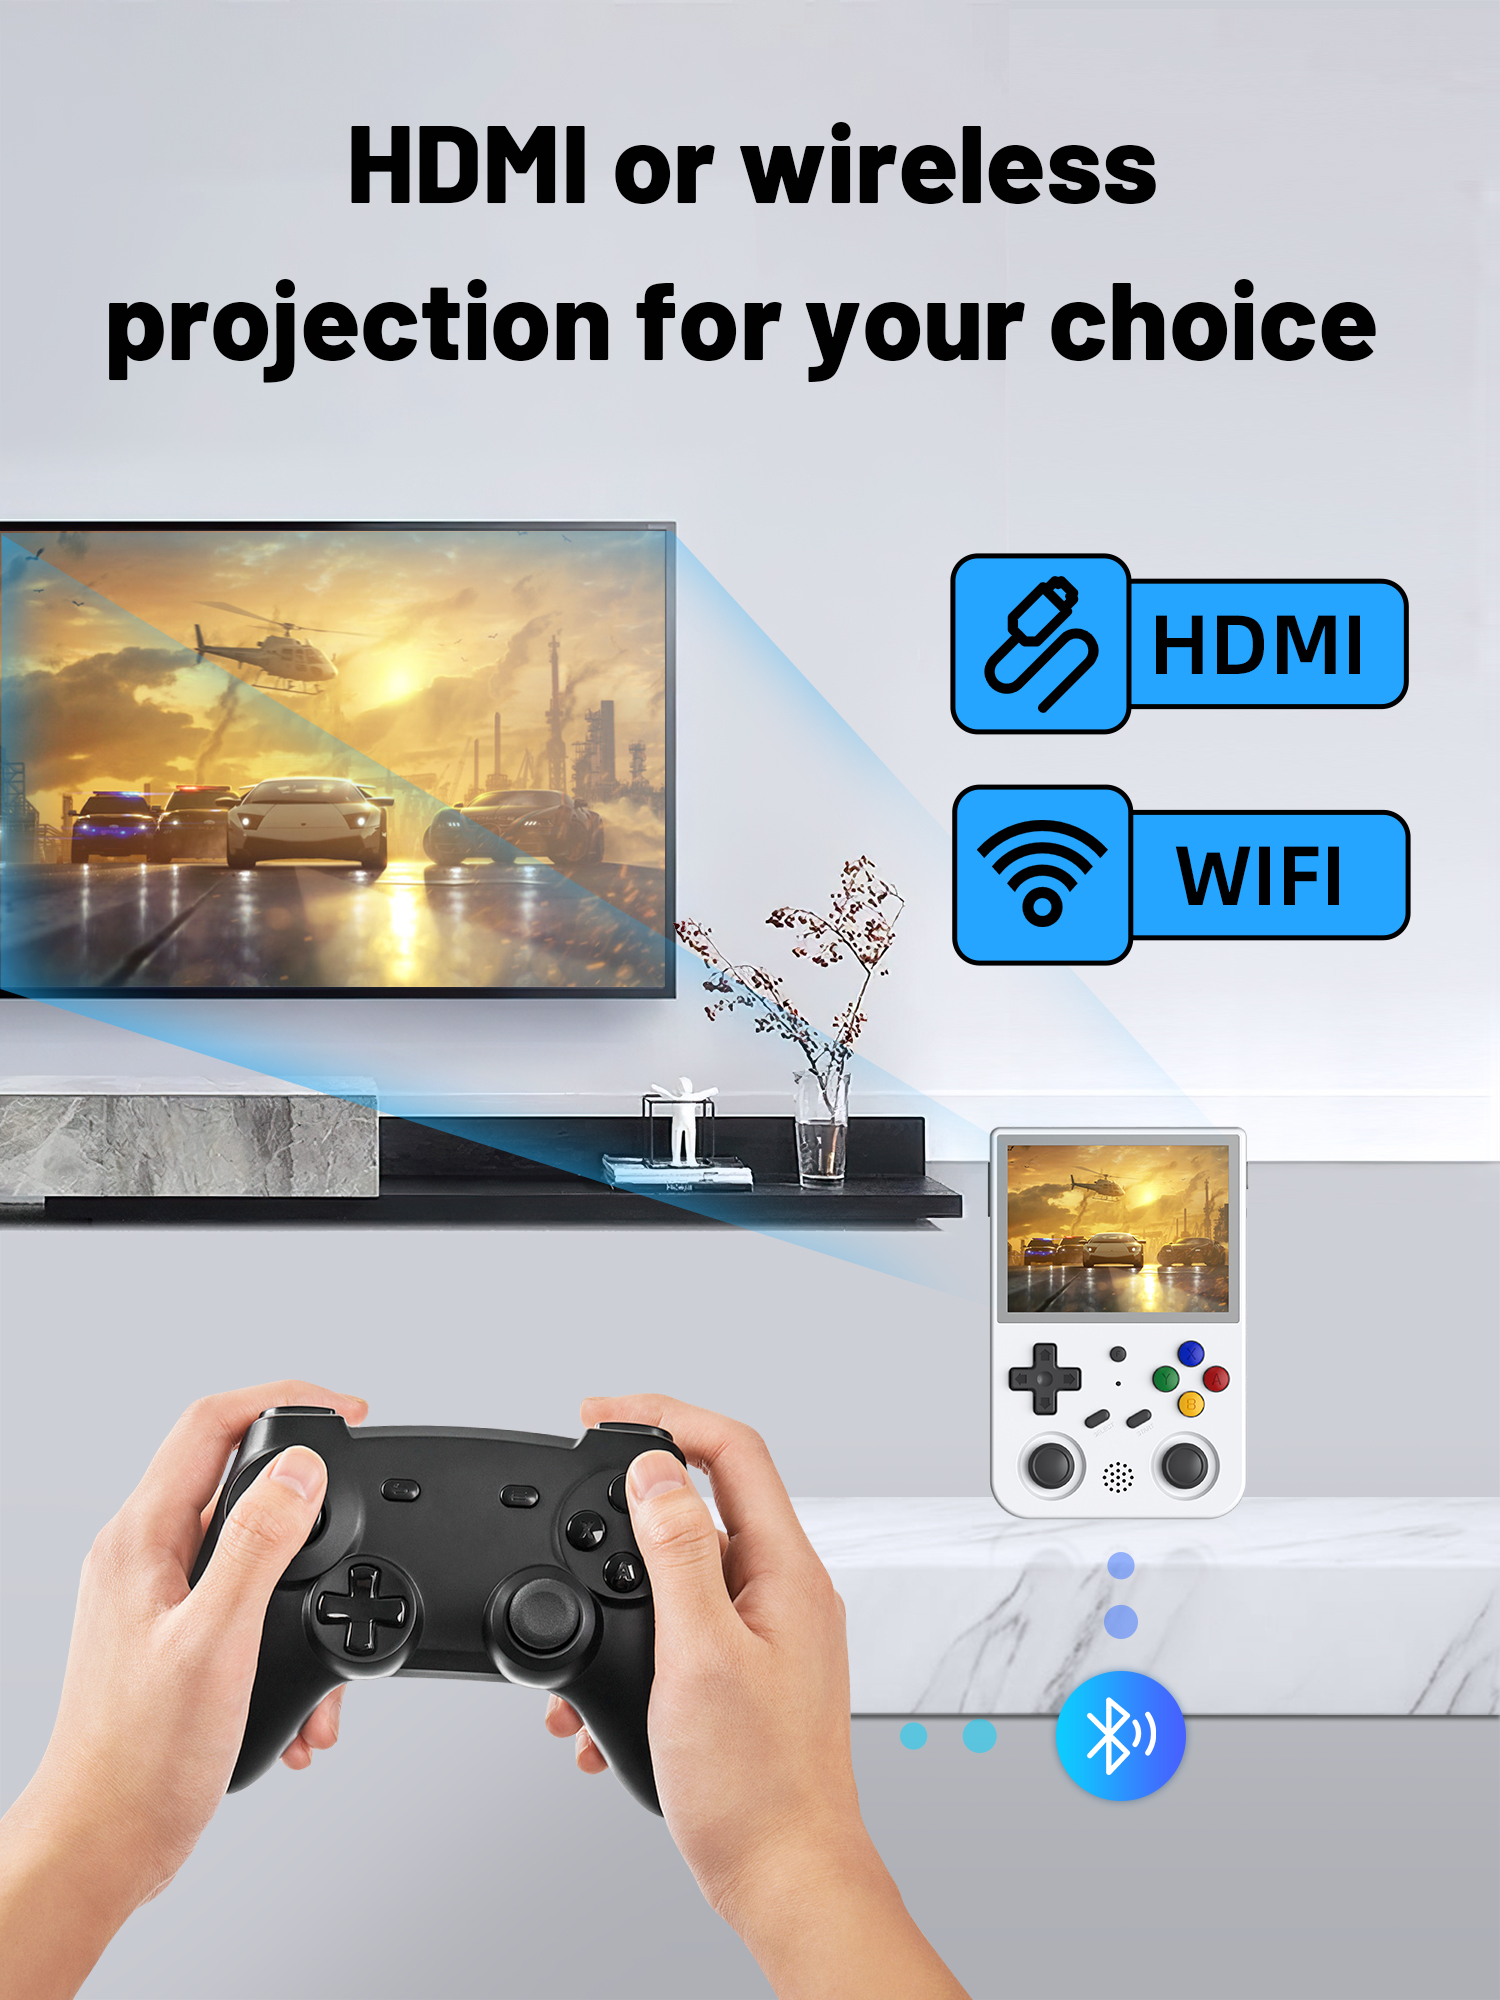 ANBERNIC RG353V 128GB 25000 Games Android Linux Dual OS Handheld Game Console LPDDR4 2GB RAM eMMC 5.1 32GB ROM 5G WiF BT4.2 3.5 inch IPS Full View Retro Video Game Player